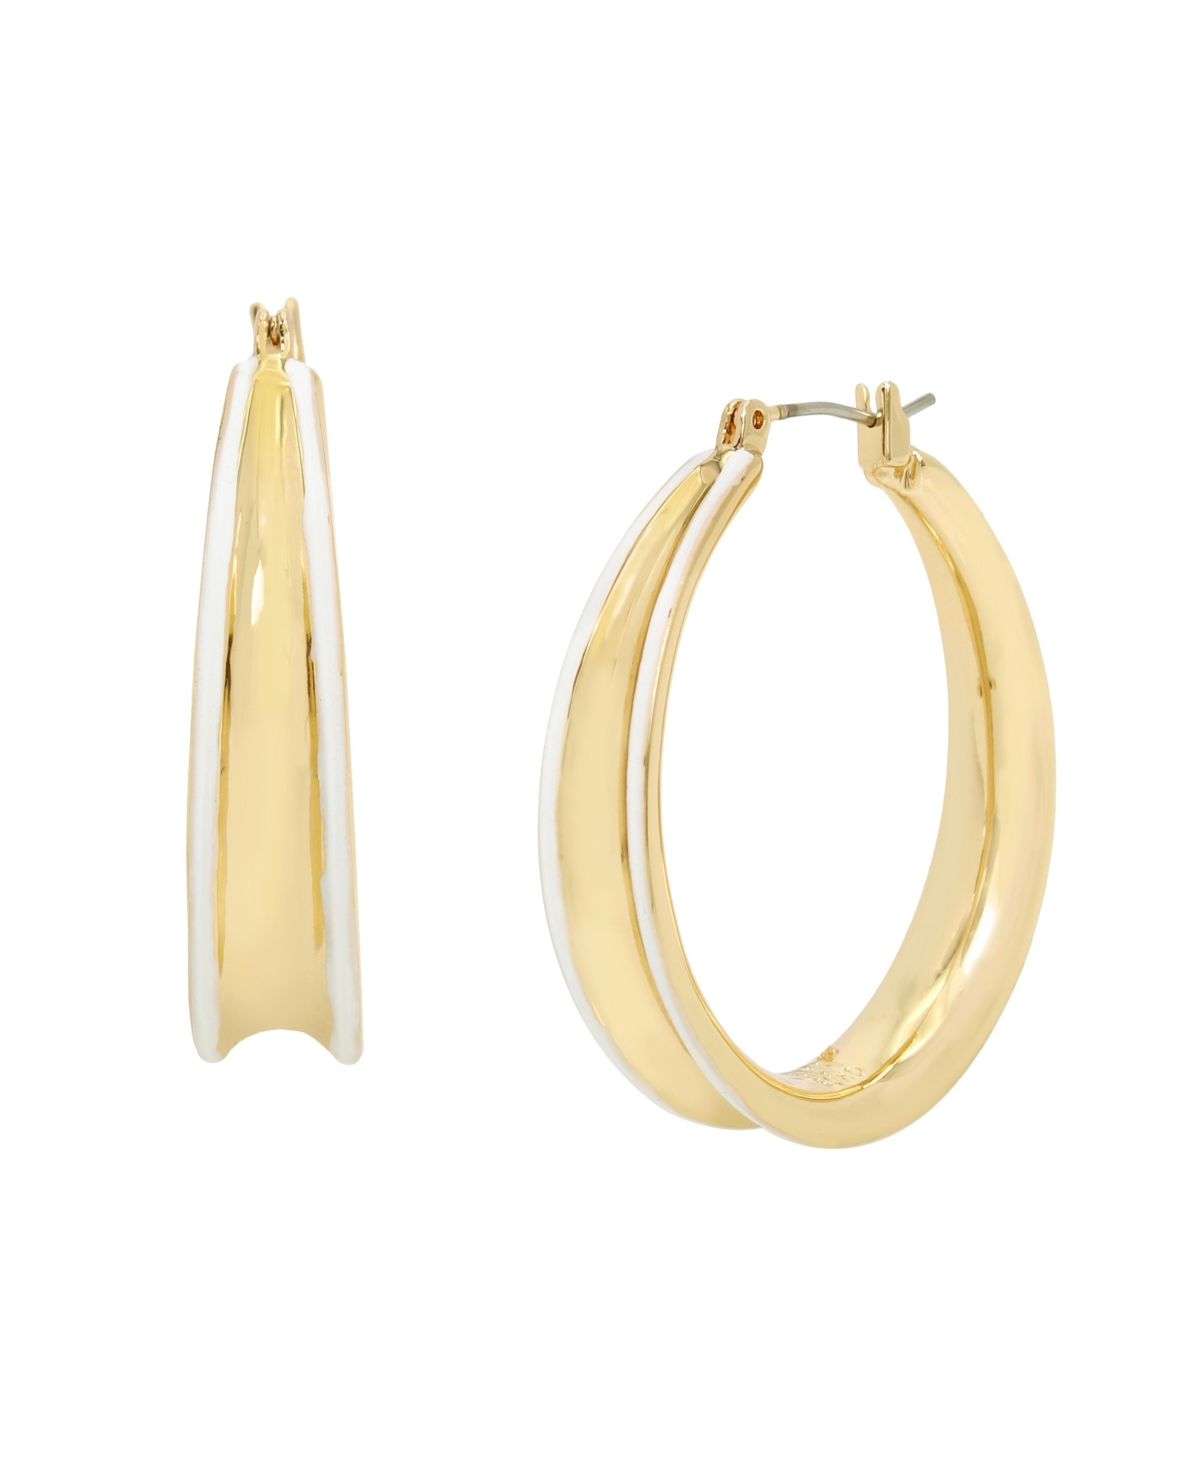 Robert Lee Morris Soho White Molten Patina Curved Hoop Earrings In Gold